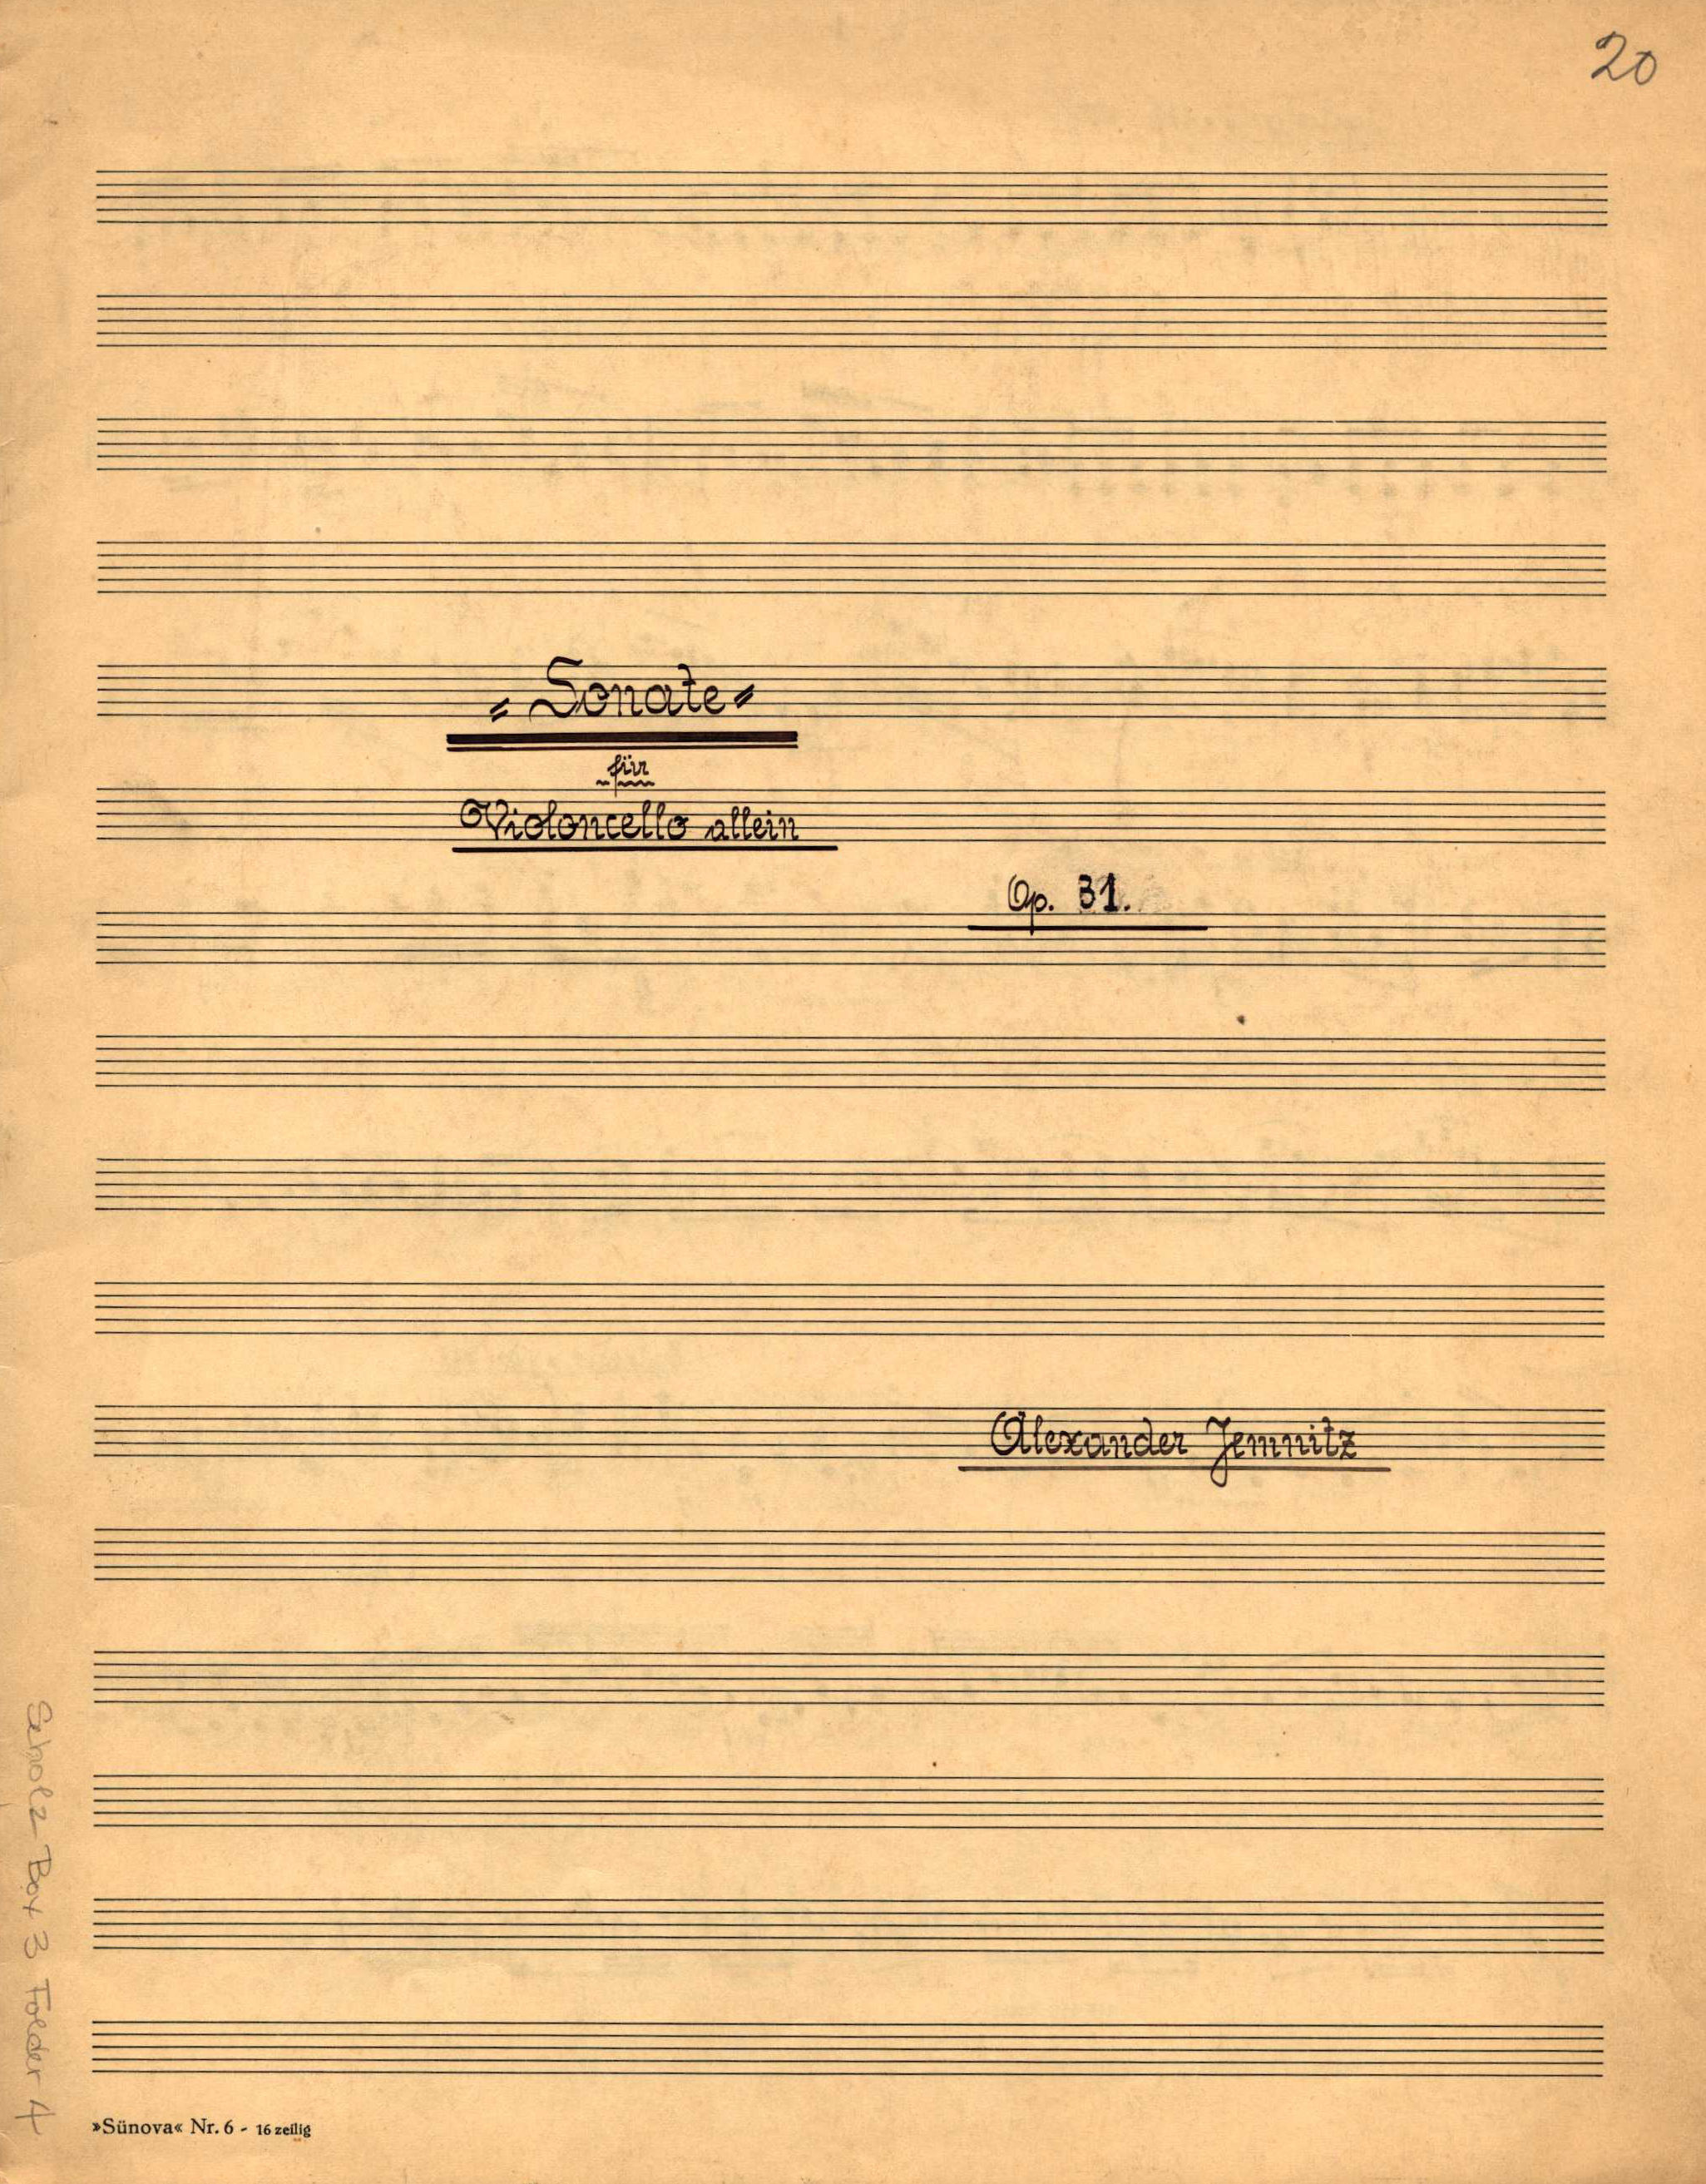 old sheet of music with handwritten notes, mf, mezzo-forte Stock